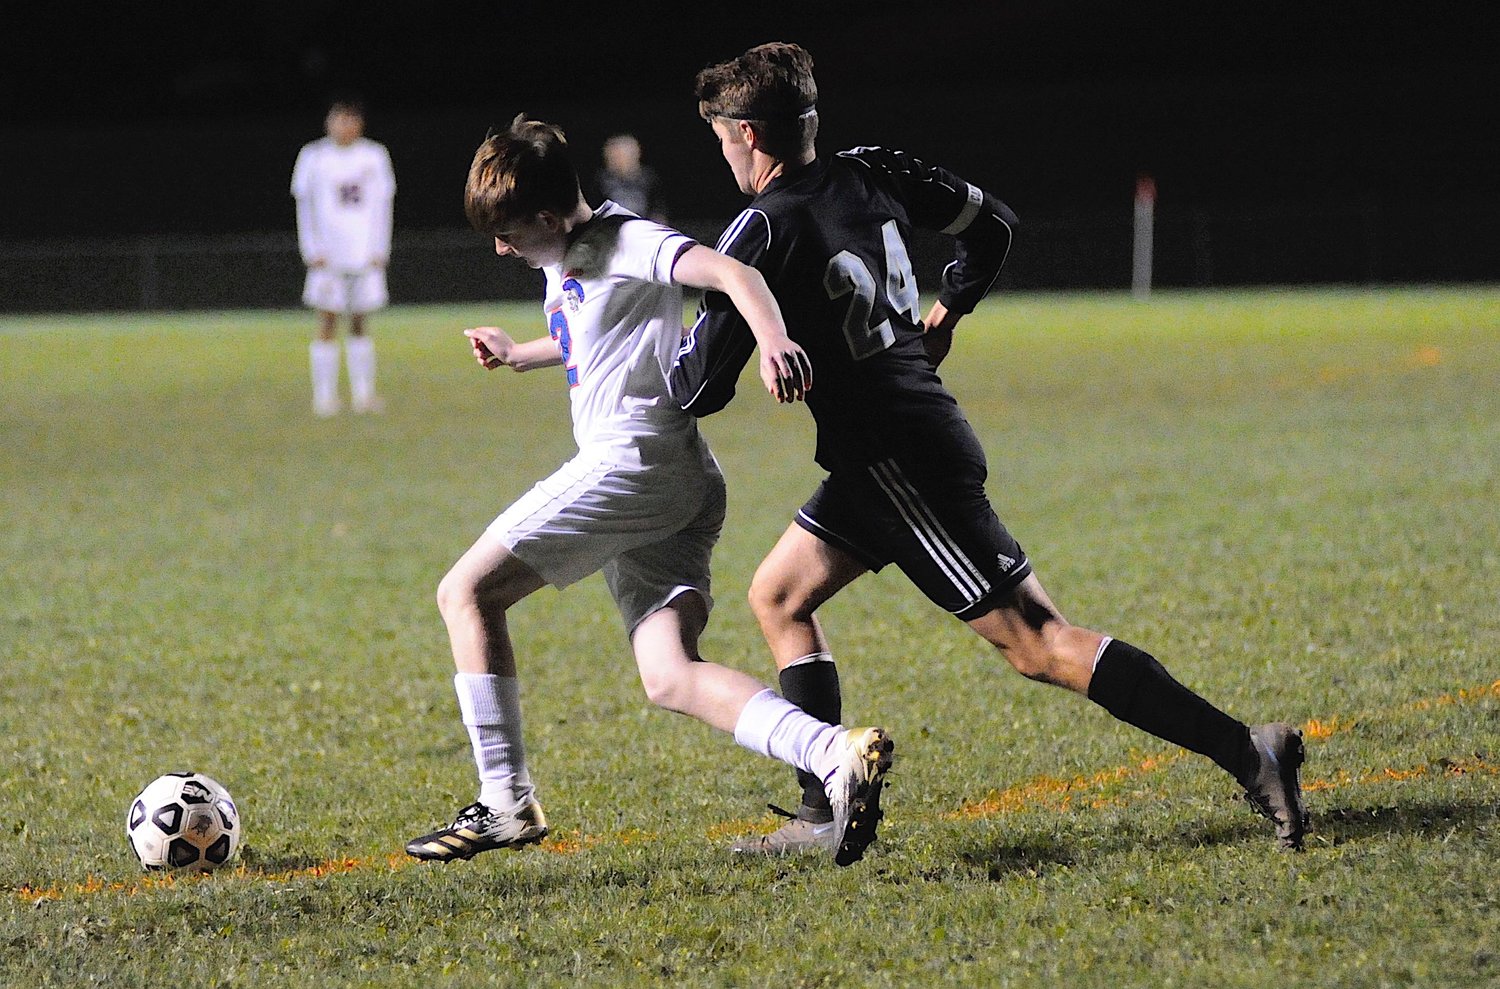 One-on-one. Seward’s Tim Raines advances the ball, as Sullivan West’s co-captain Dylan Sager closes in on the action.